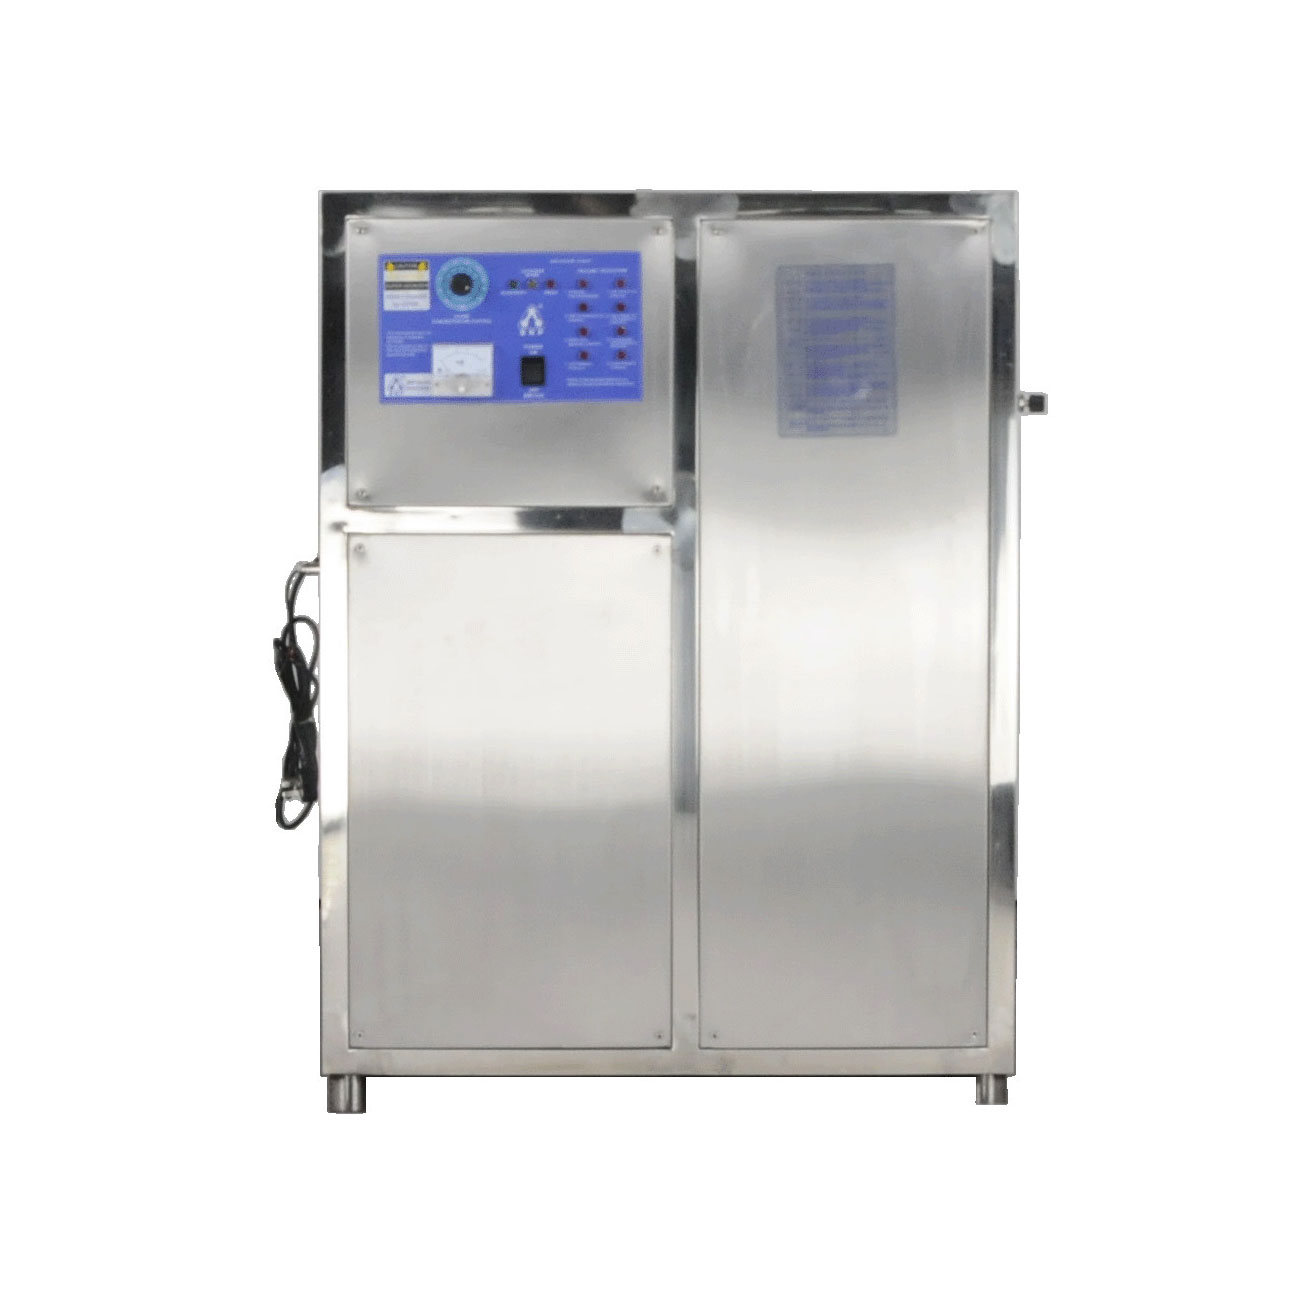 Reasonable price for Ozone Generators For Aquaculture - Reliable Supplier China BNP SOZ-YW-200G Industrial Oxygen-Enriched Ozone Generator for Public Place Air Purifier and O3 Sterilizer Water Dis...